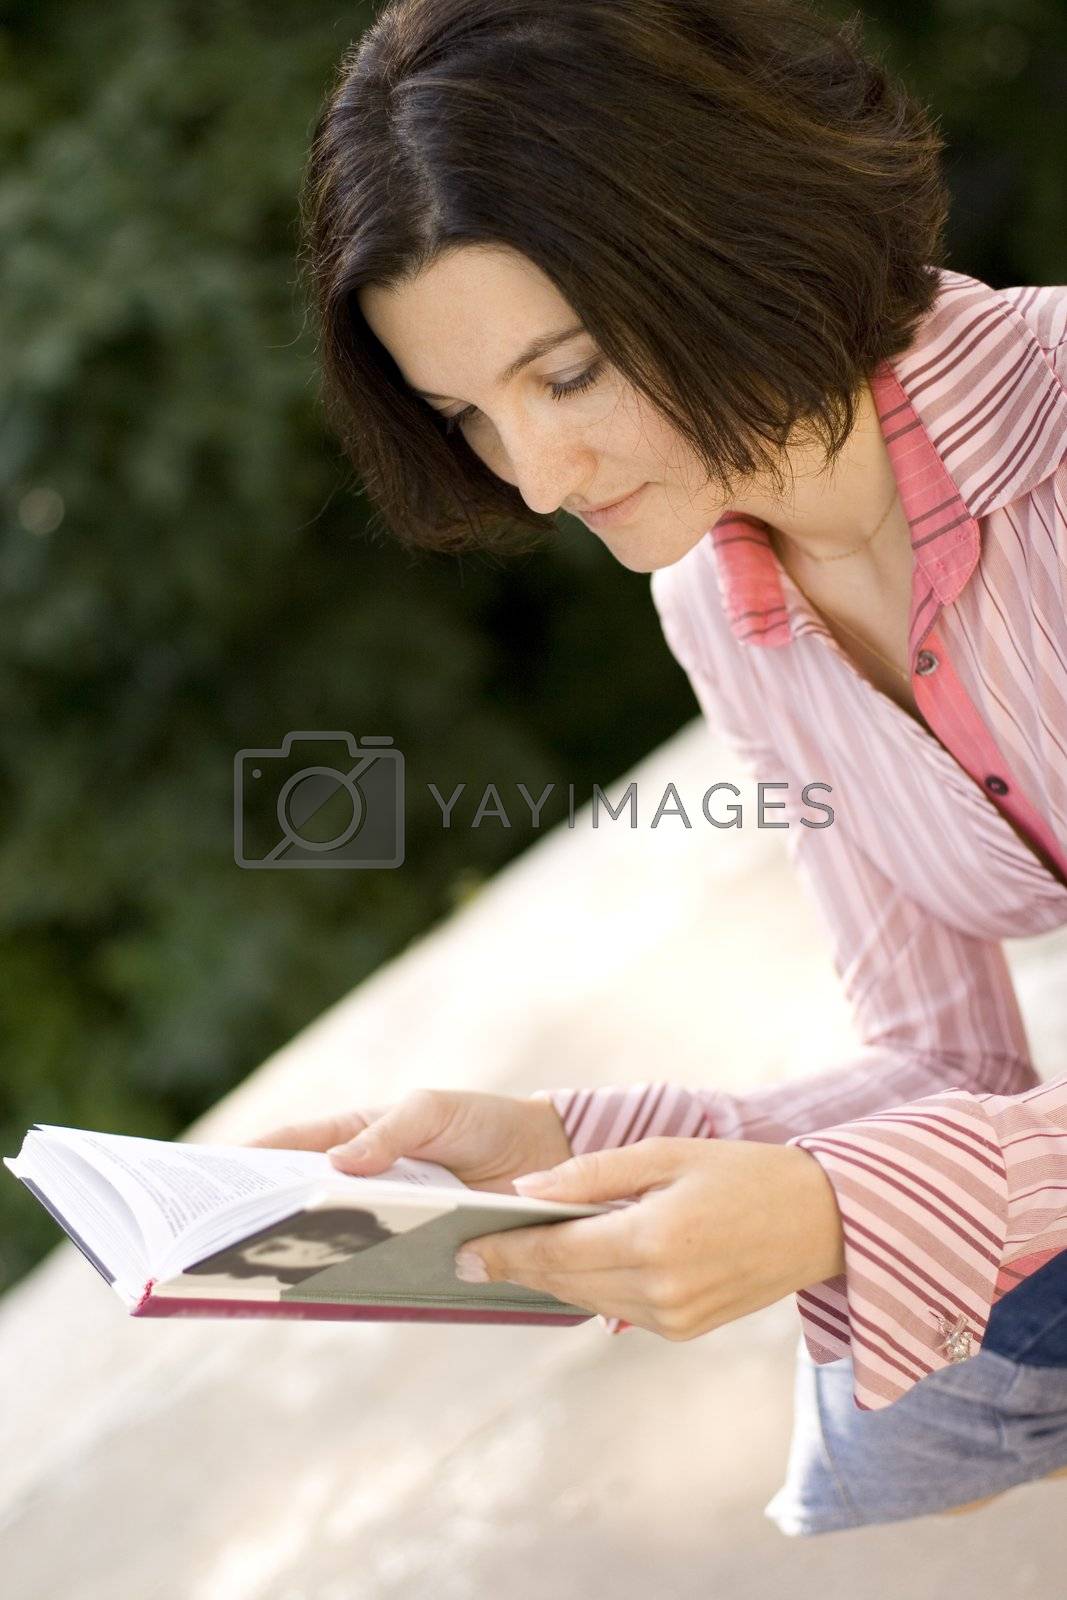 Royalty free image of woman with book by marylooo